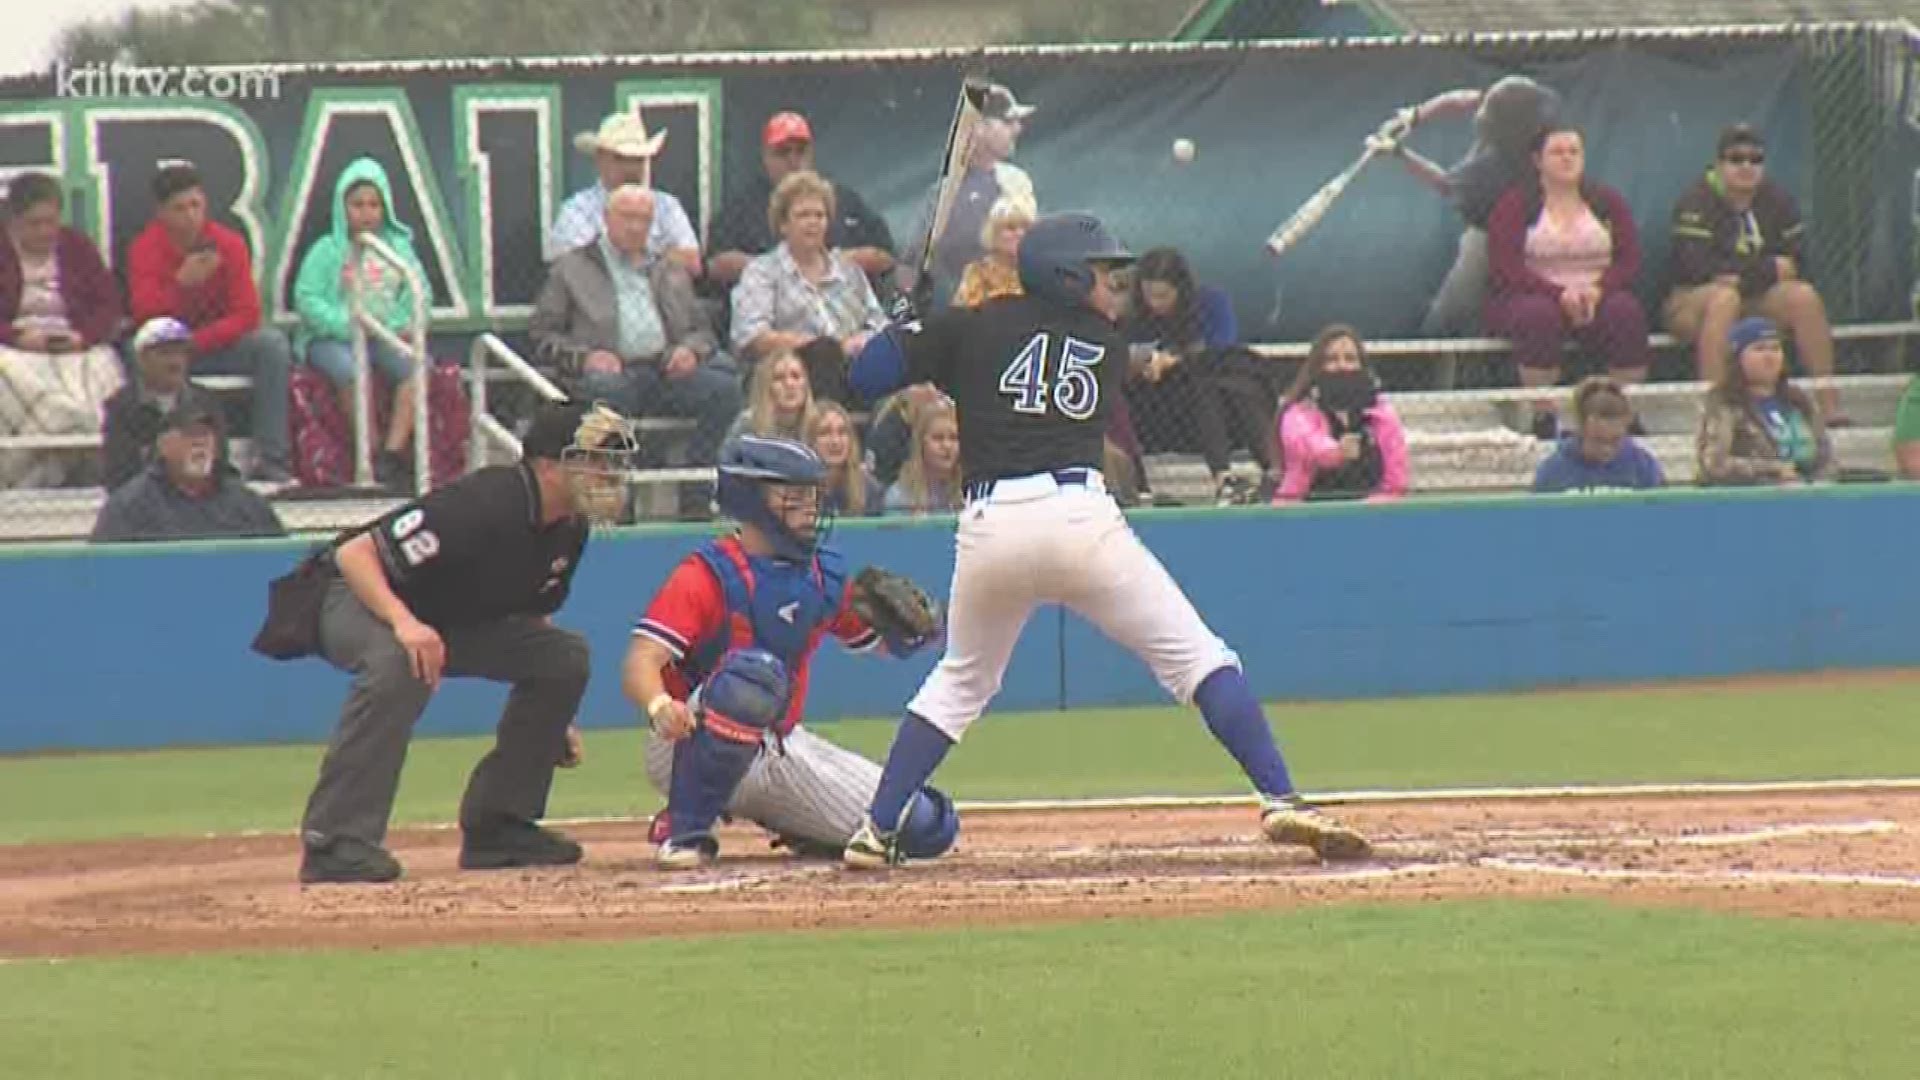 Texas A&M-Corpus Christi scored five runs in the 2nd inning en-route to a 9-3 win over UT-Arlington.